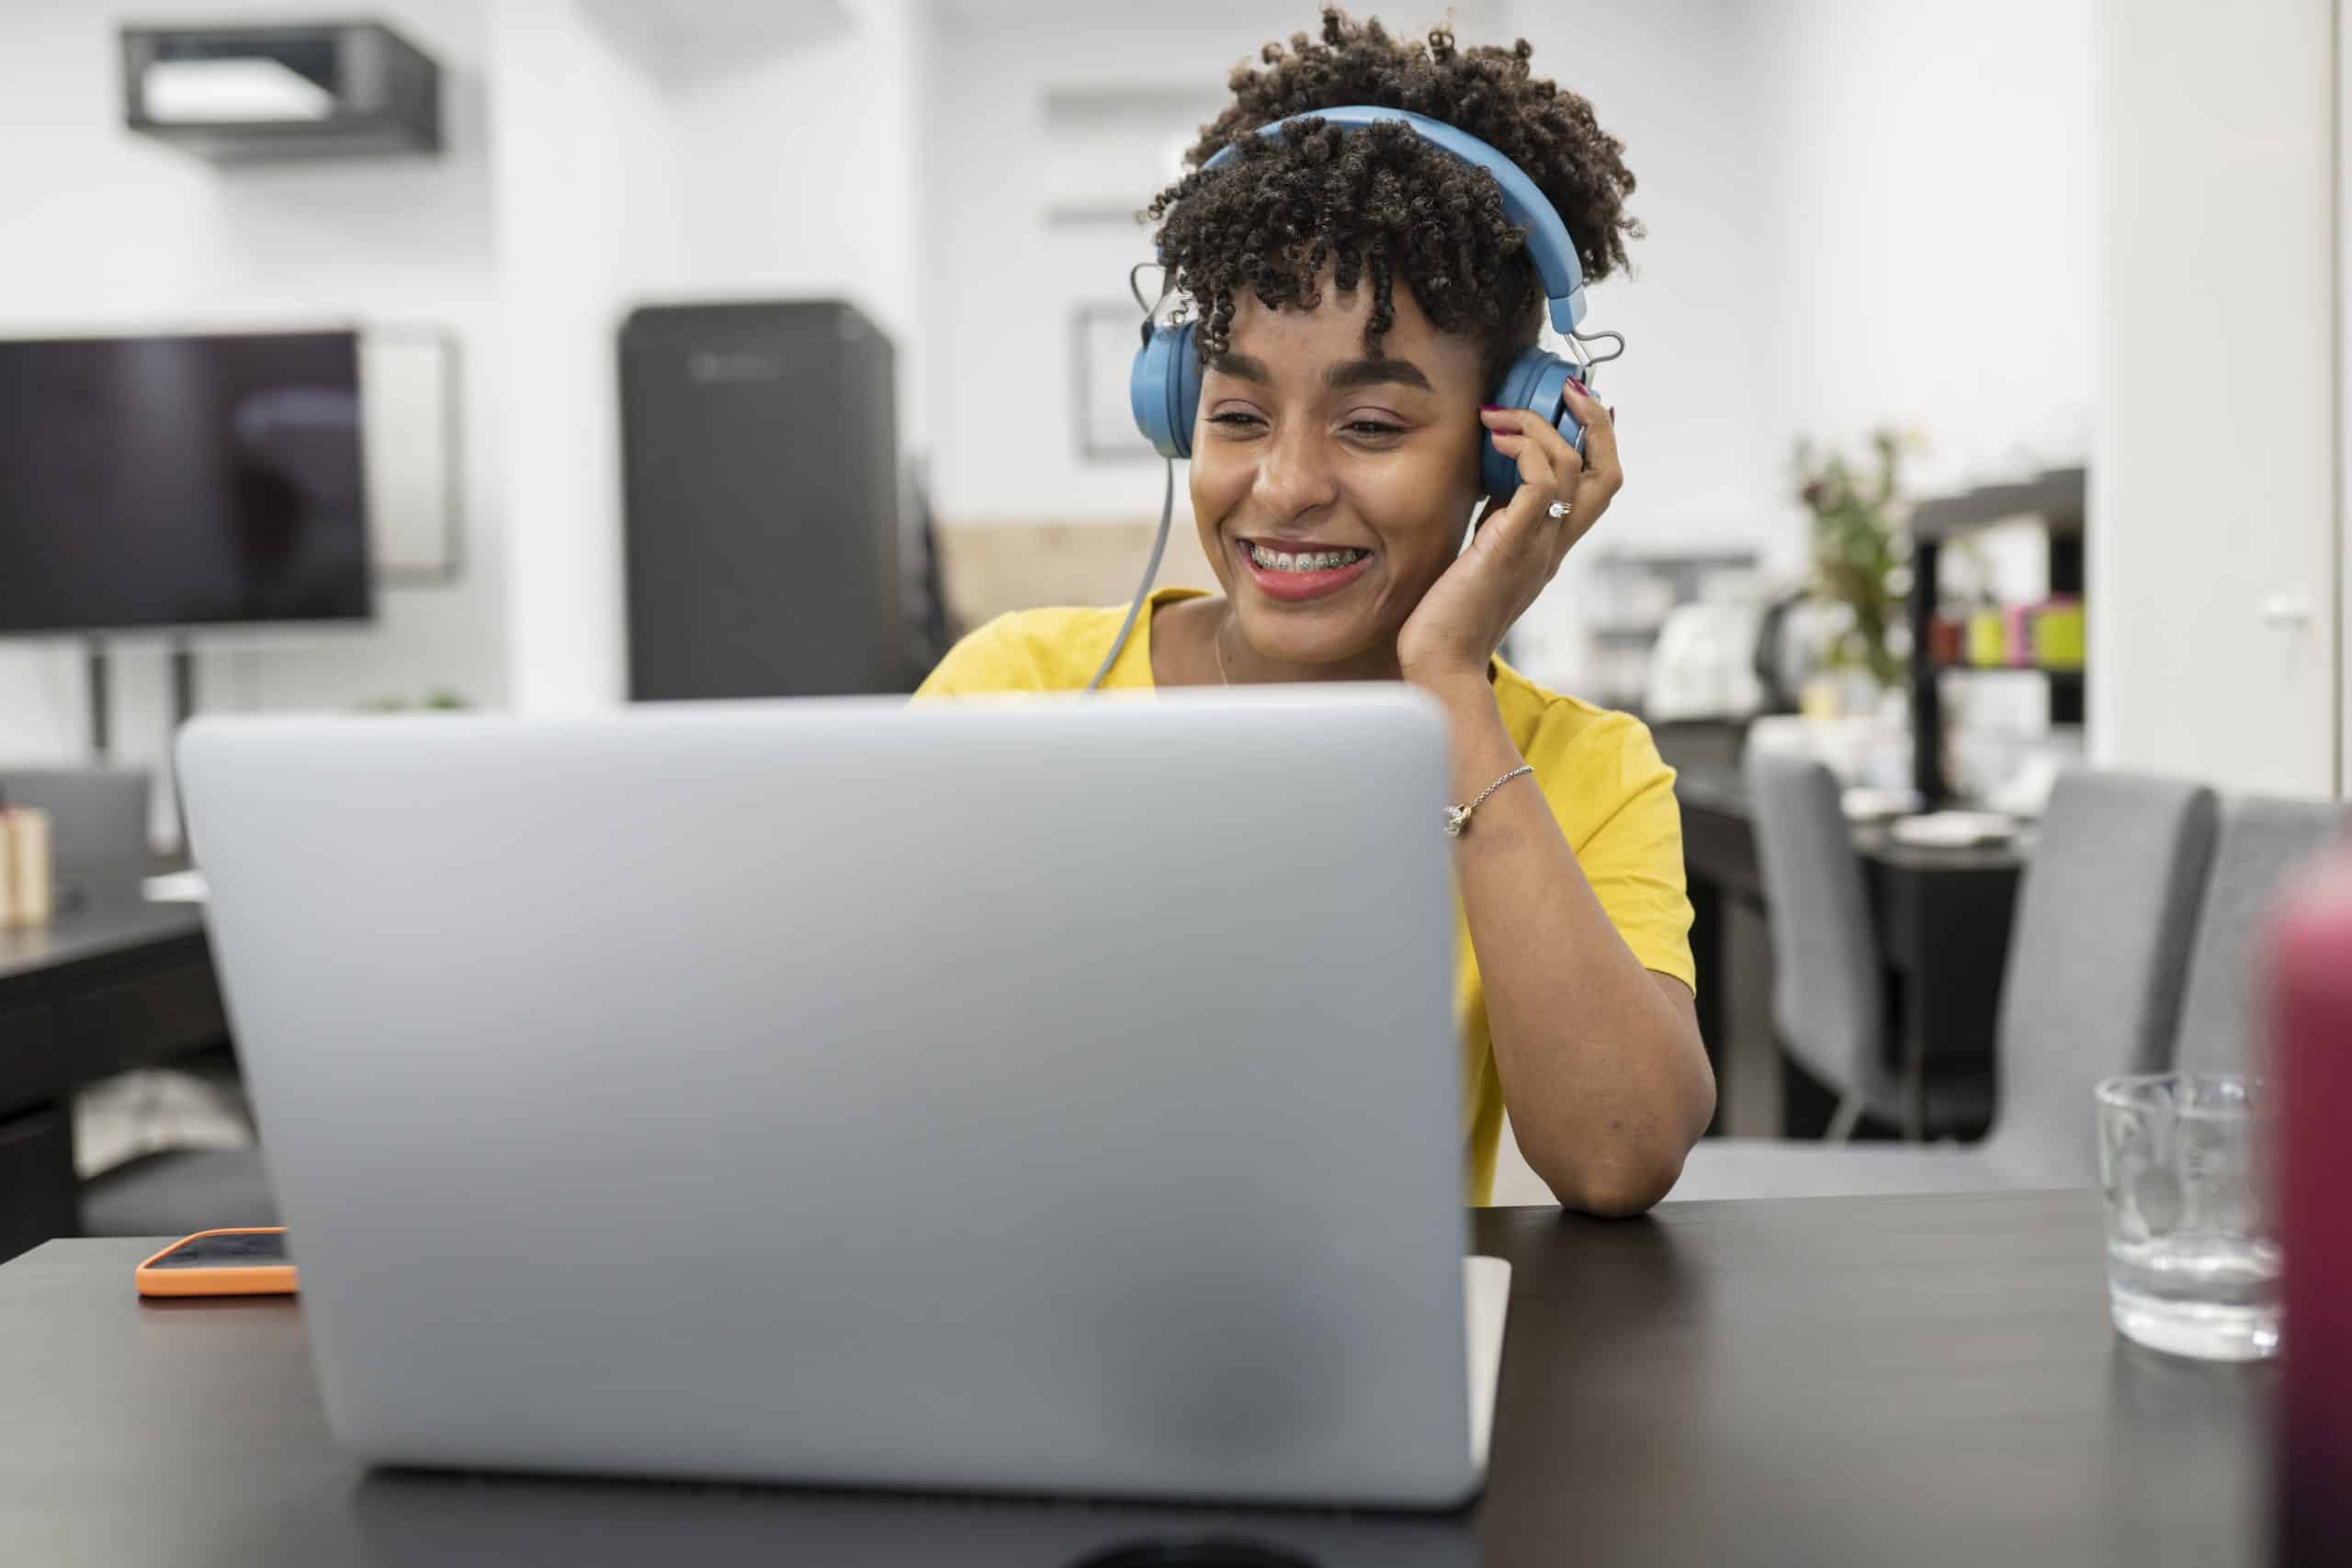 Woman with a headset on listening to a podcast on her laptop